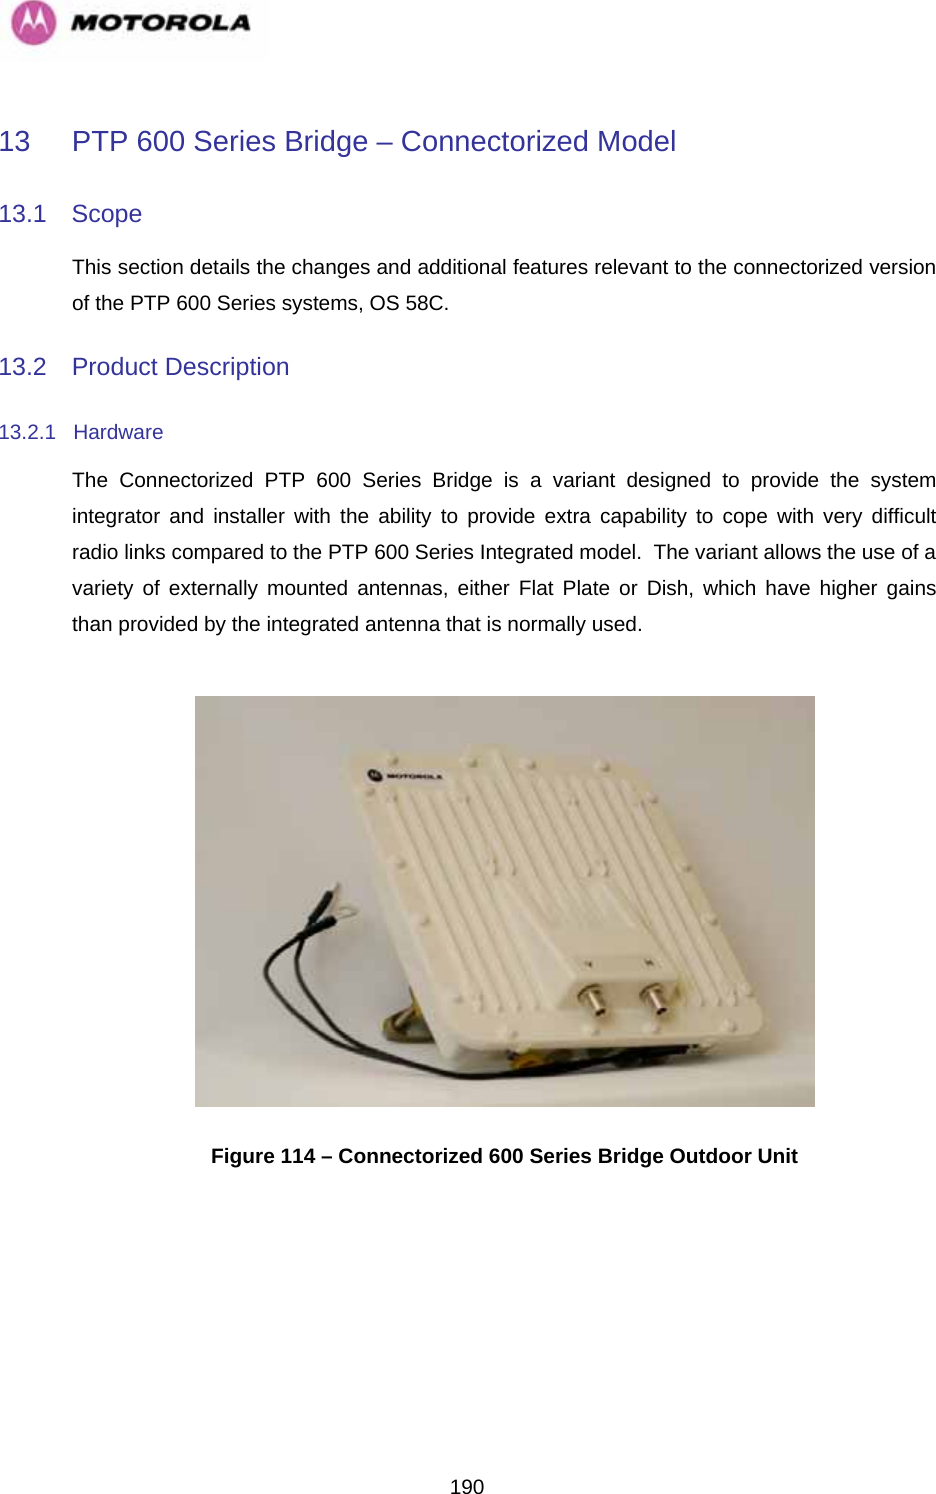   19013  PTP 600 Series Bridge – Connectorized Model 13.1 Scope This section details the changes and additional features relevant to the connectorized version of the PTP 600 Series systems, OS 58C. 13.2 Product Description 13.2.1 Hardware The Connectorized PTP 600 Series Bridge is a variant designed to provide the system integrator and installer with the ability to provide extra capability to cope with very difficult radio links compared to the PTP 600 Series Integrated model.  The variant allows the use of a variety of externally mounted antennas, either Flat Plate or Dish, which have higher gains than provided by the integrated antenna that is normally used.   Figure 114 – Connectorized 600 Series Bridge Outdoor Unit  